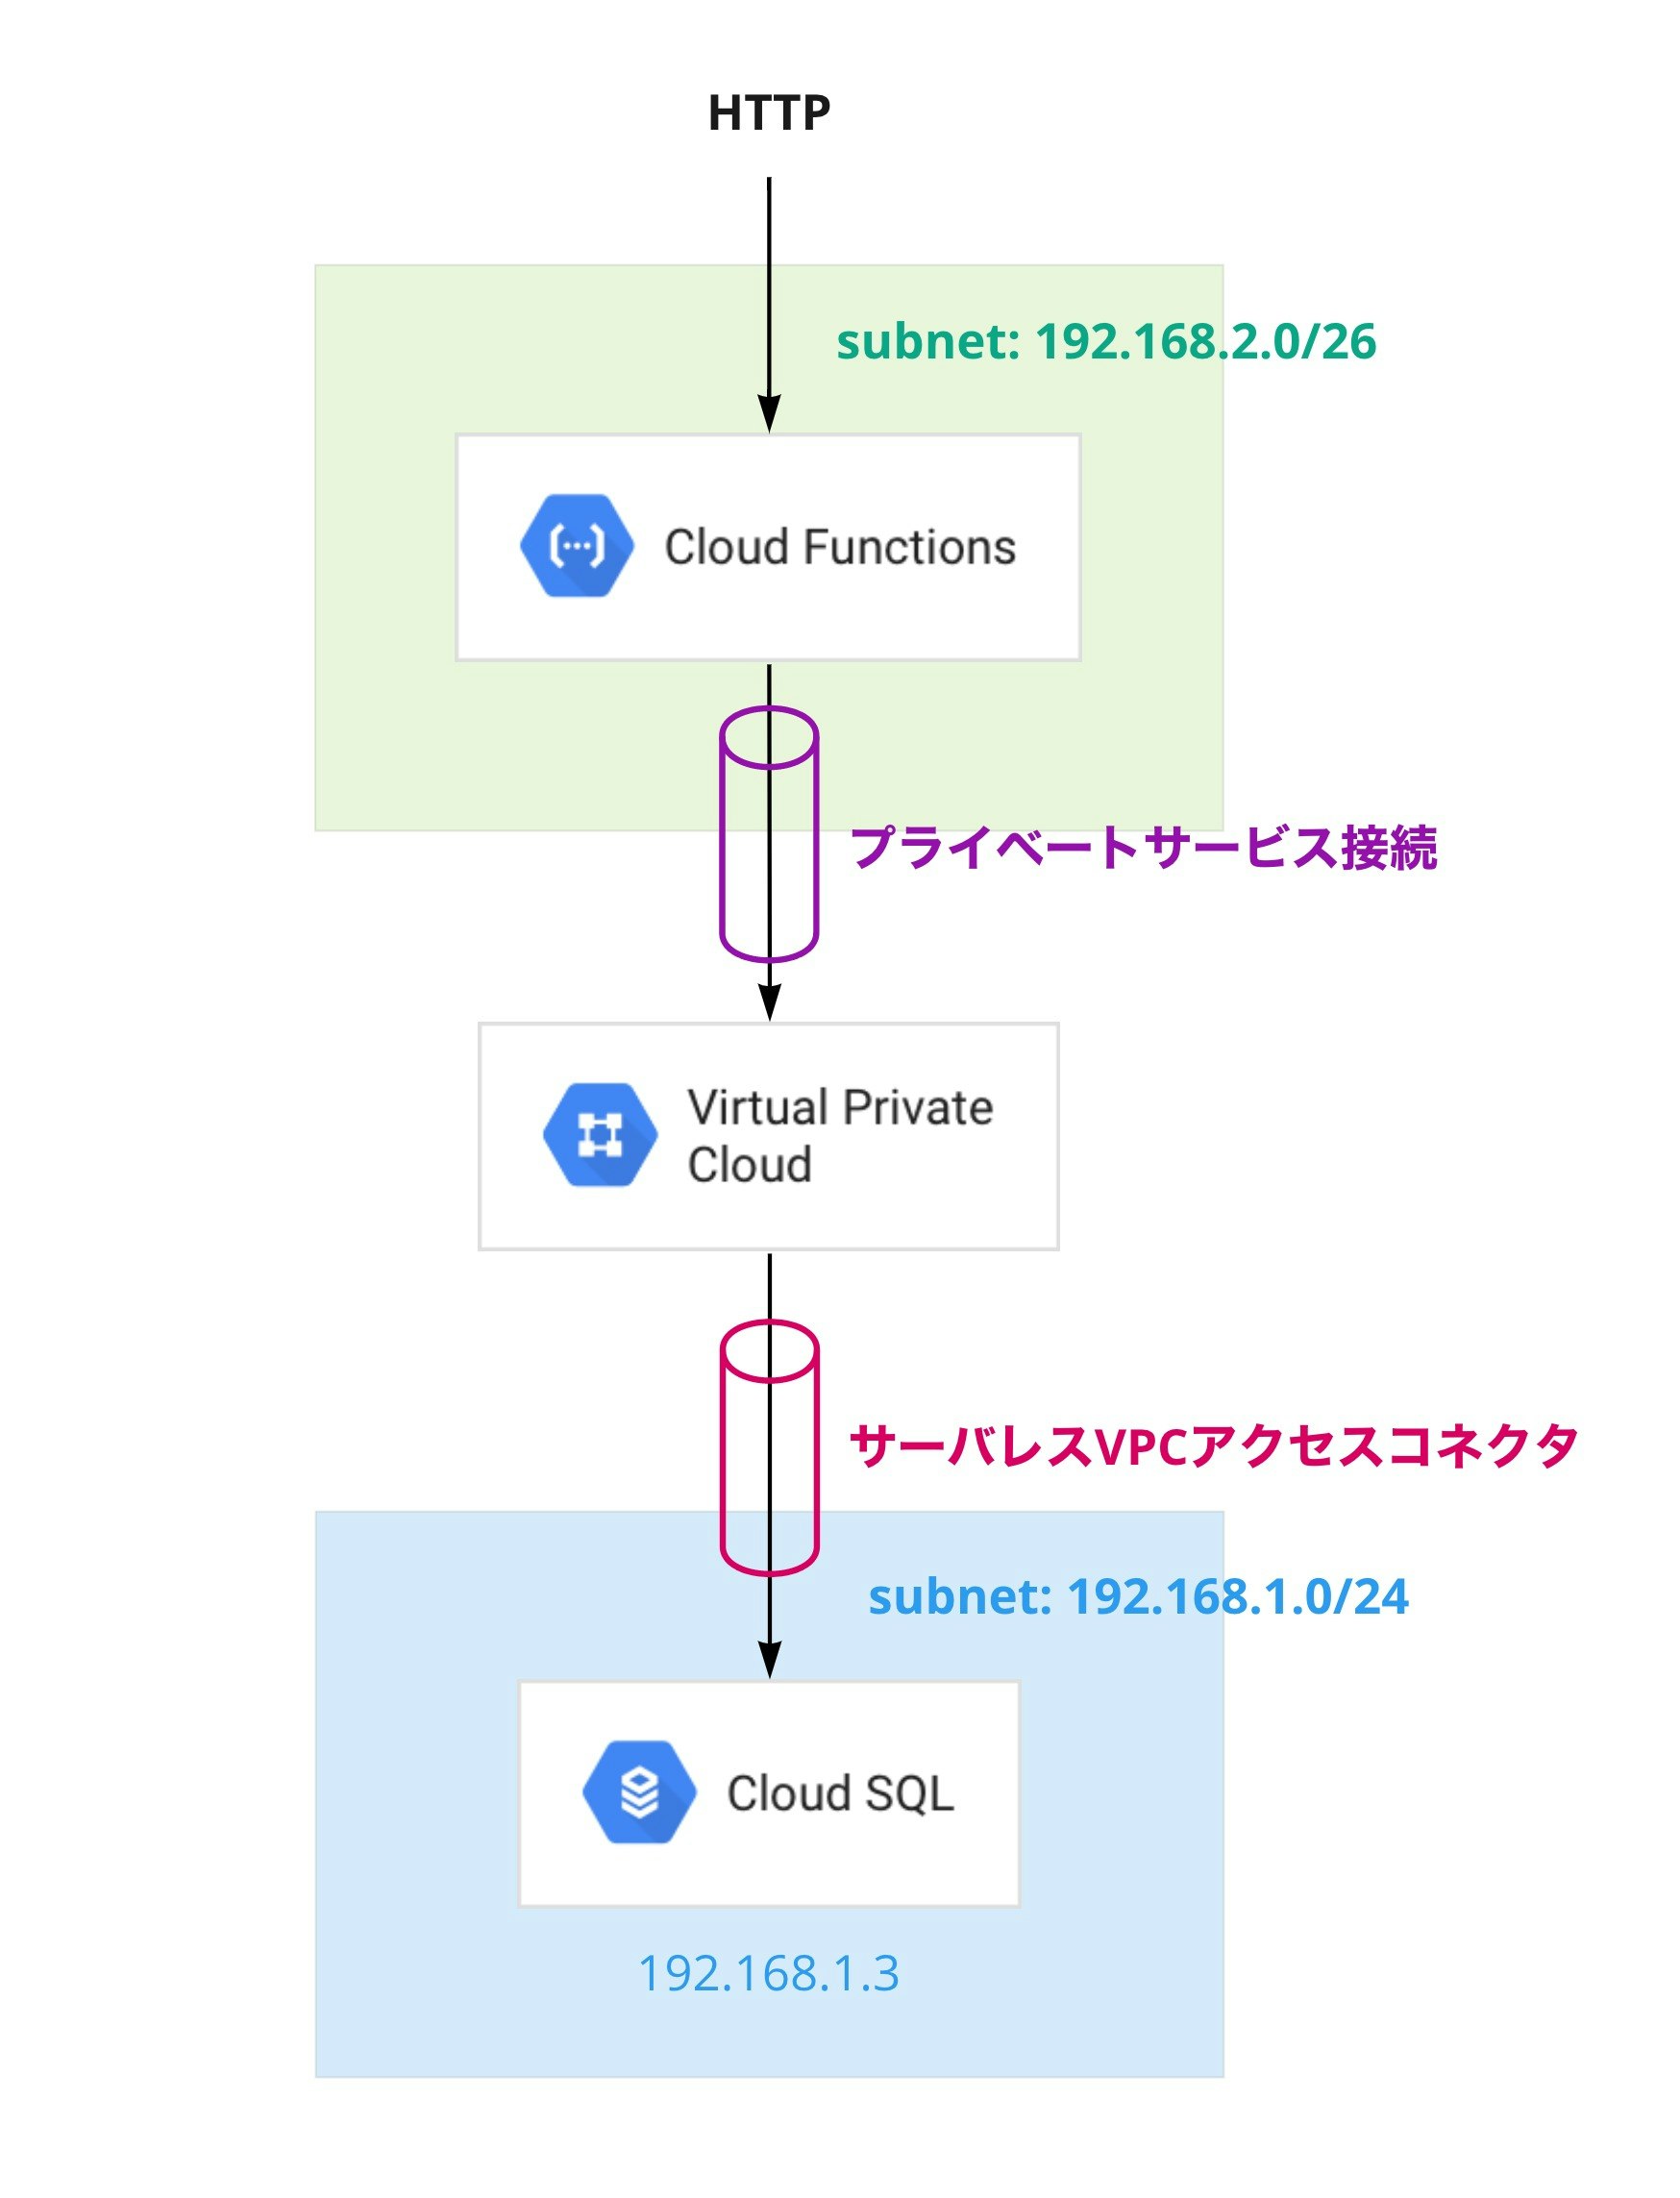 cloudfunctions-sql - New frame.jpg